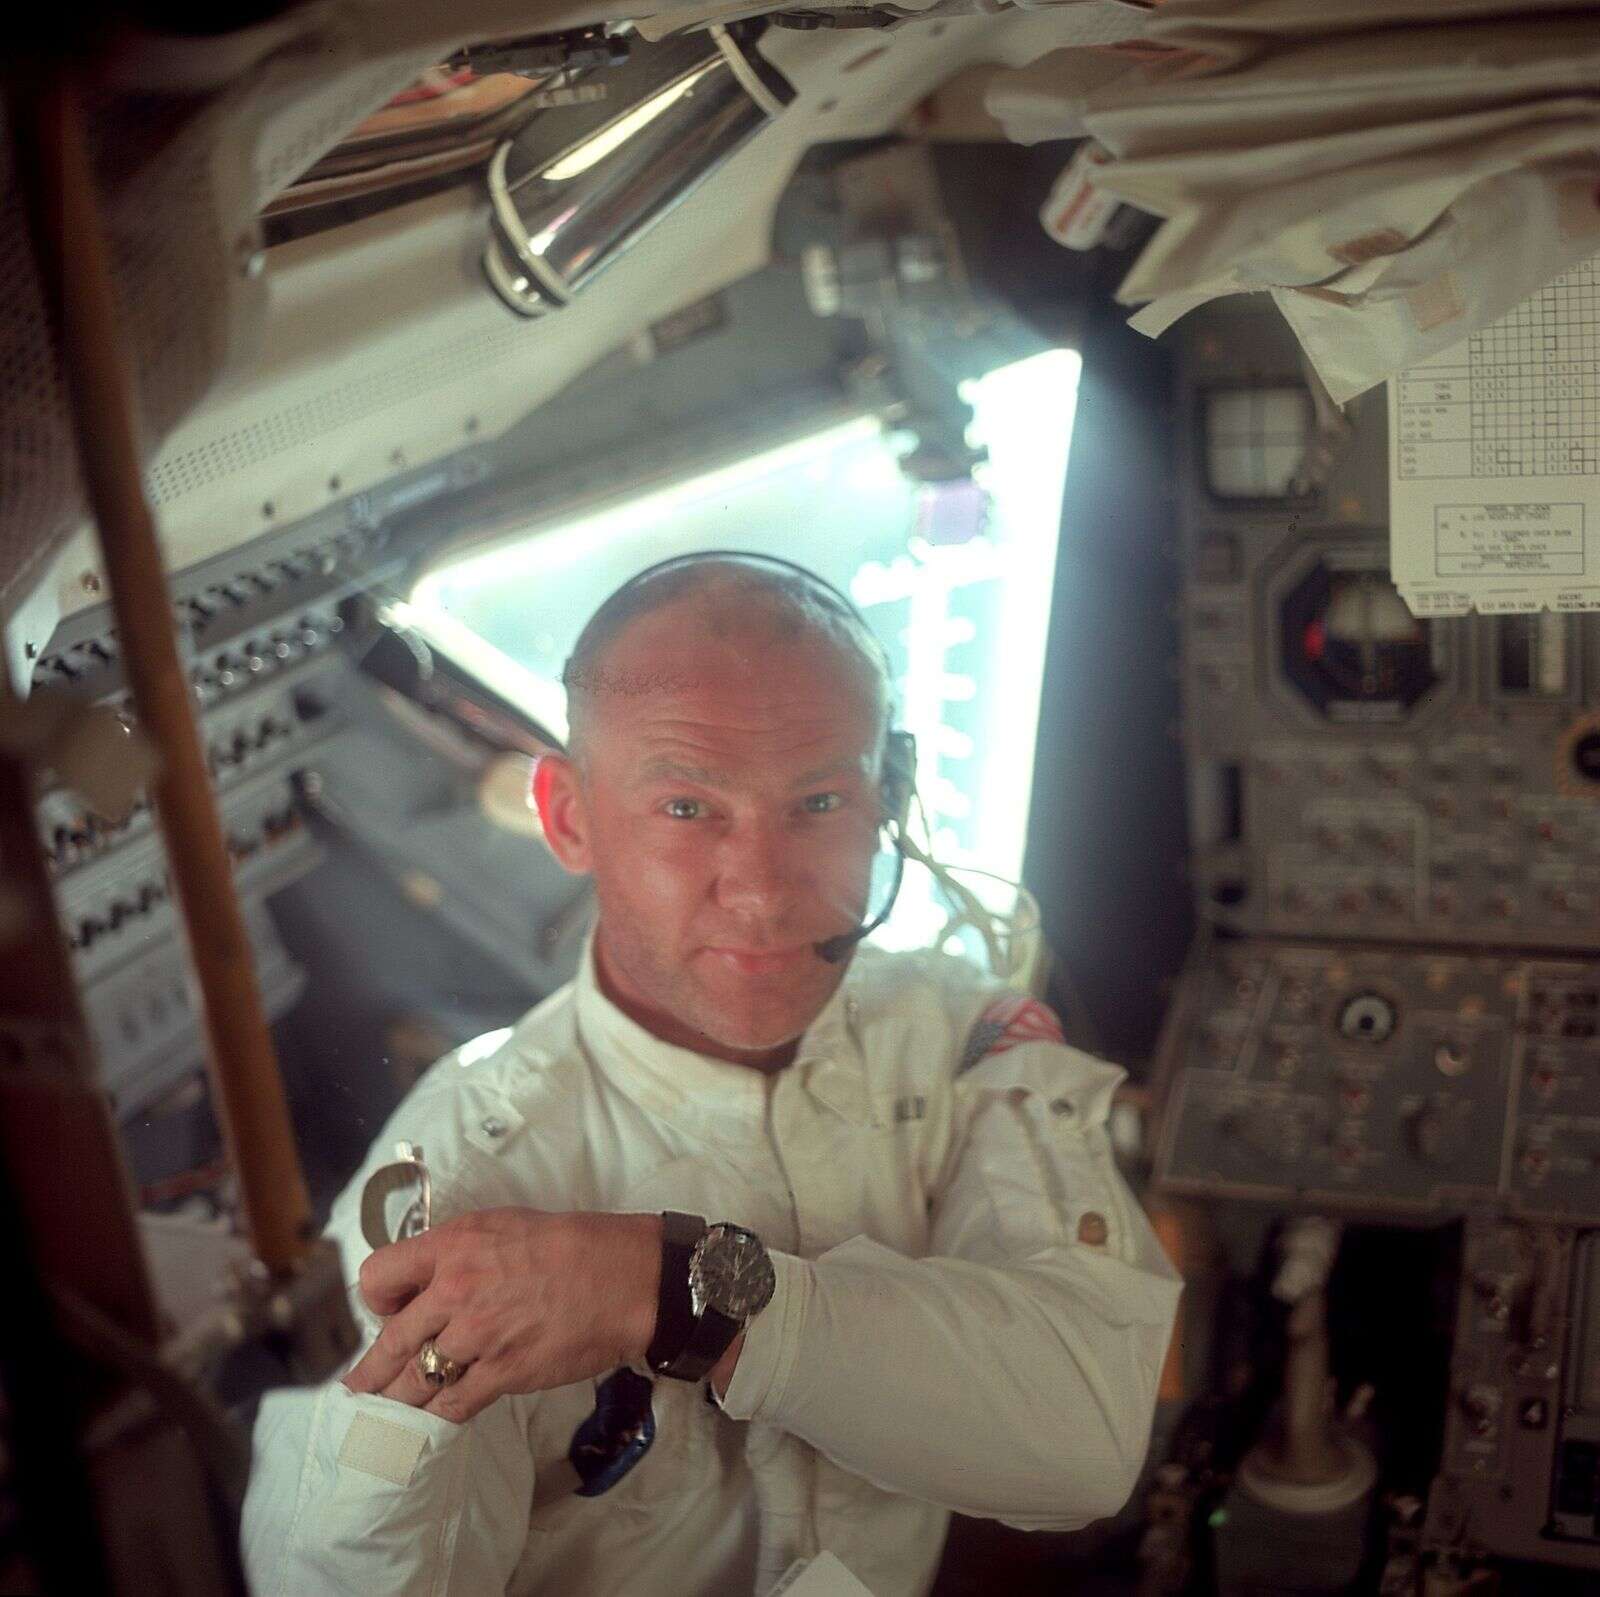 snoopy, space and the speedmaster: the collaboration that enabled mankind's greatest achievement